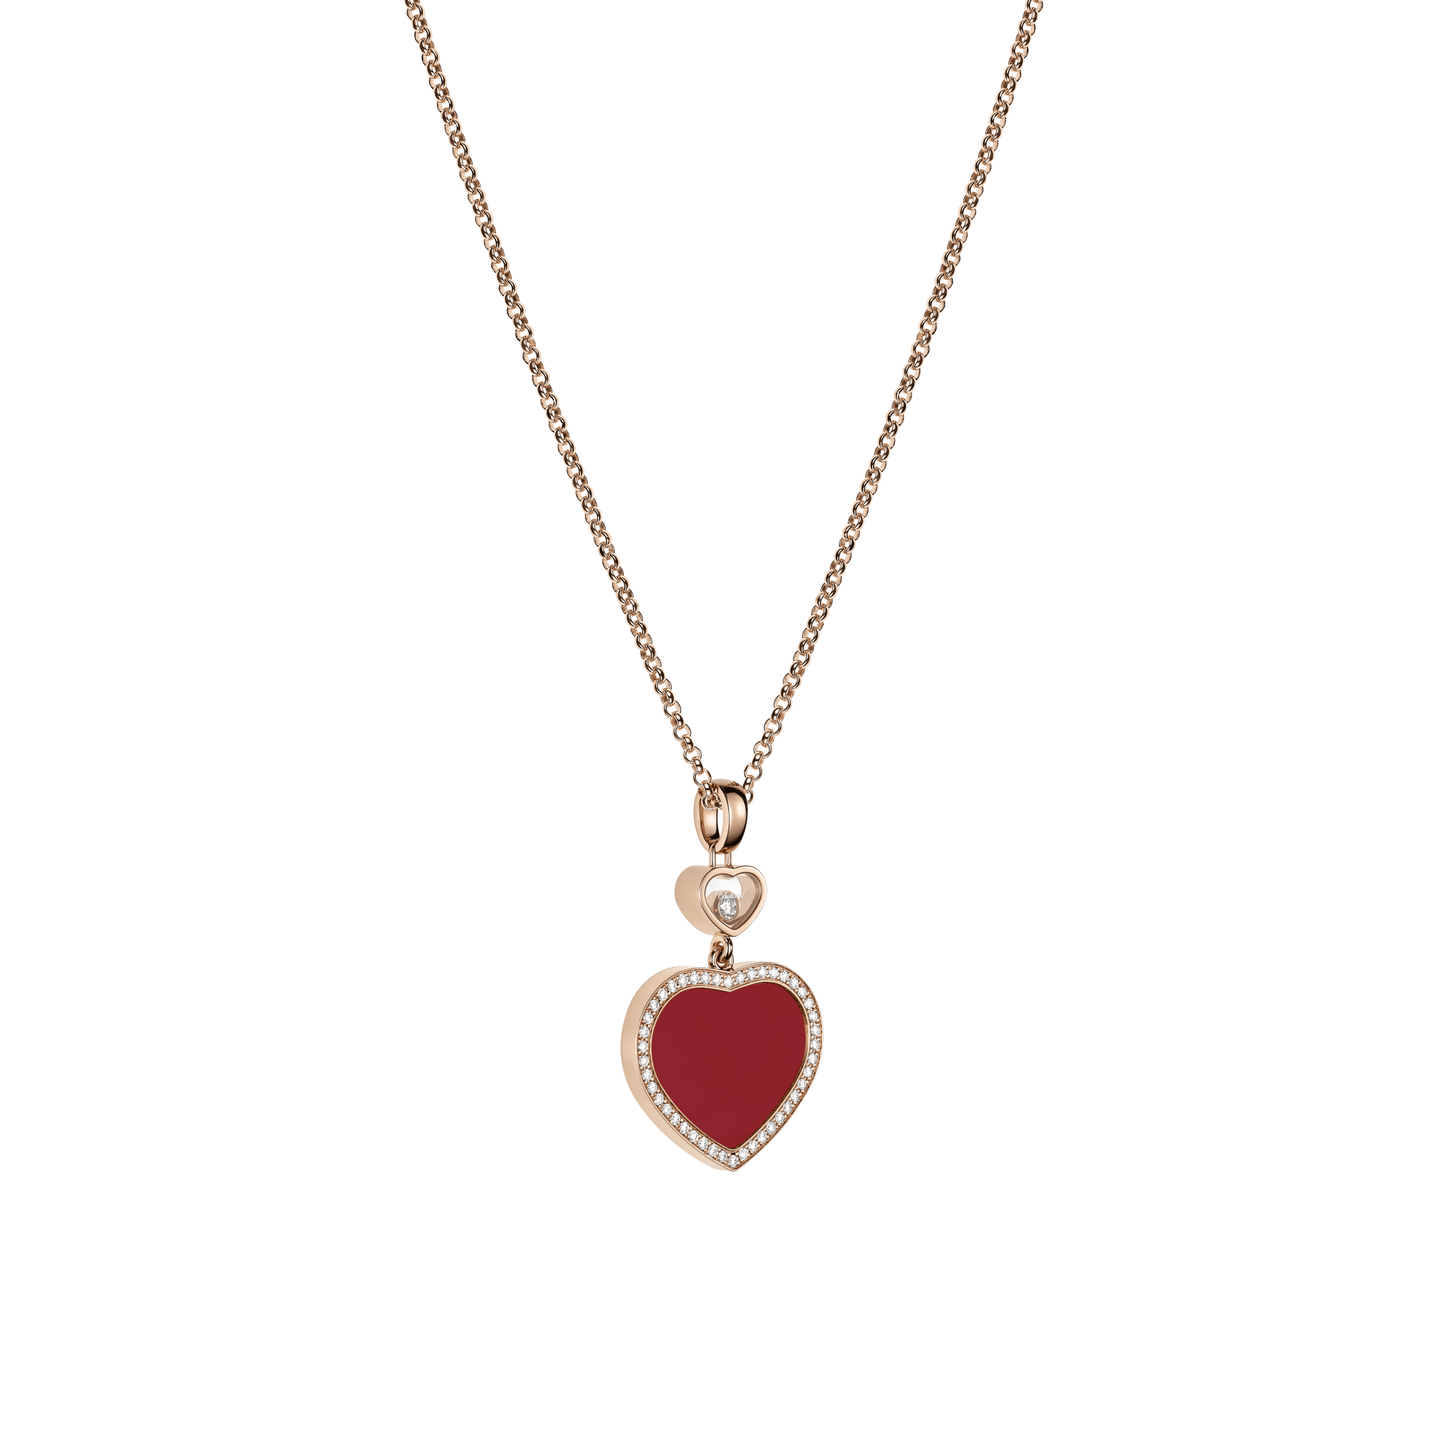 HAPPY HEARTS PENDANT, ETHICAL ROSE GOLD, DIAMOND, RED STONE 79A074-5801